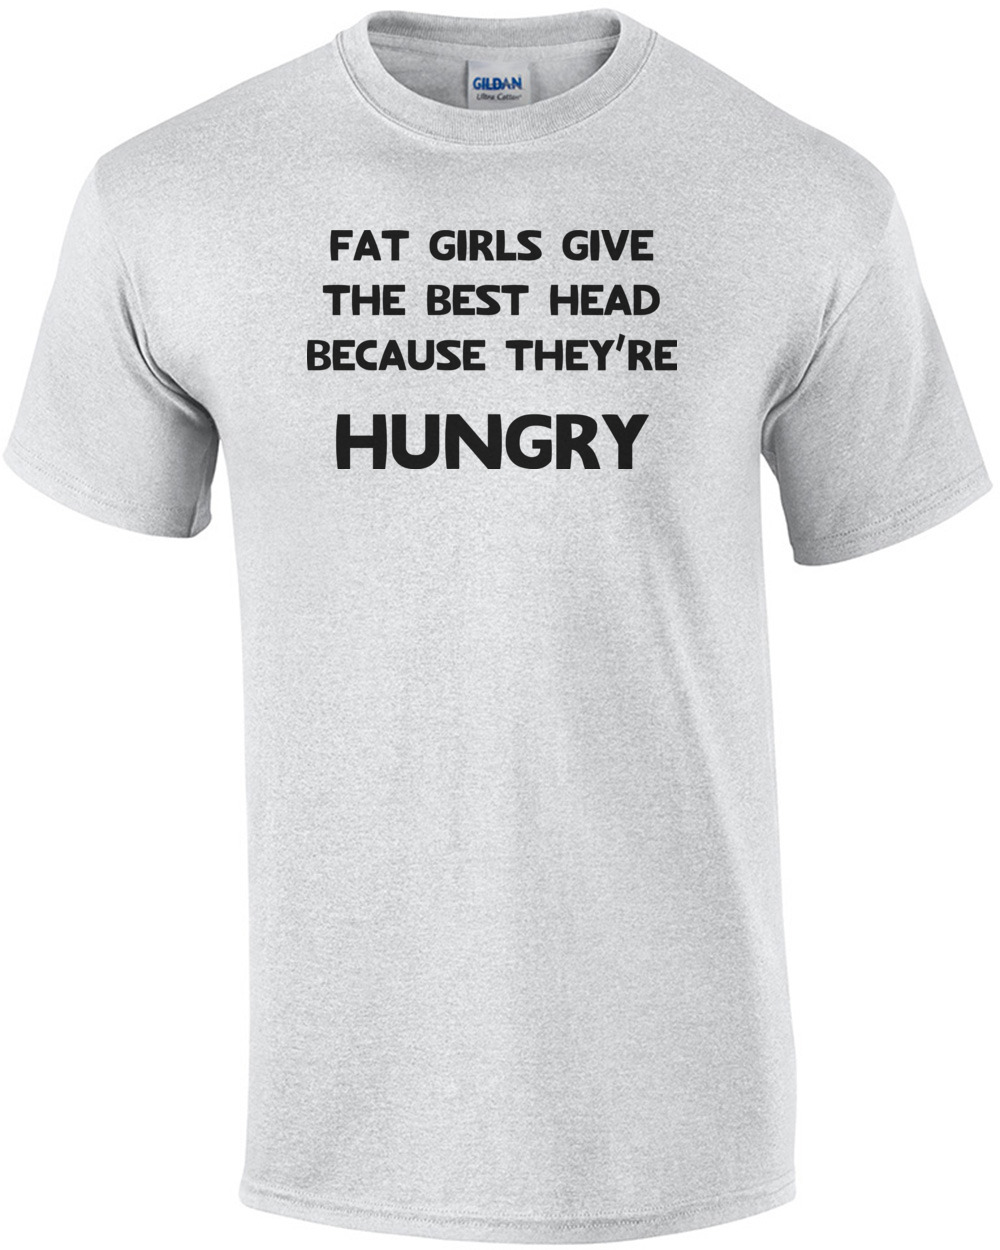 fat-girls-give-the-best-head-because-theyre-hungry-funny-shirt-mens-regular-ash.jpg